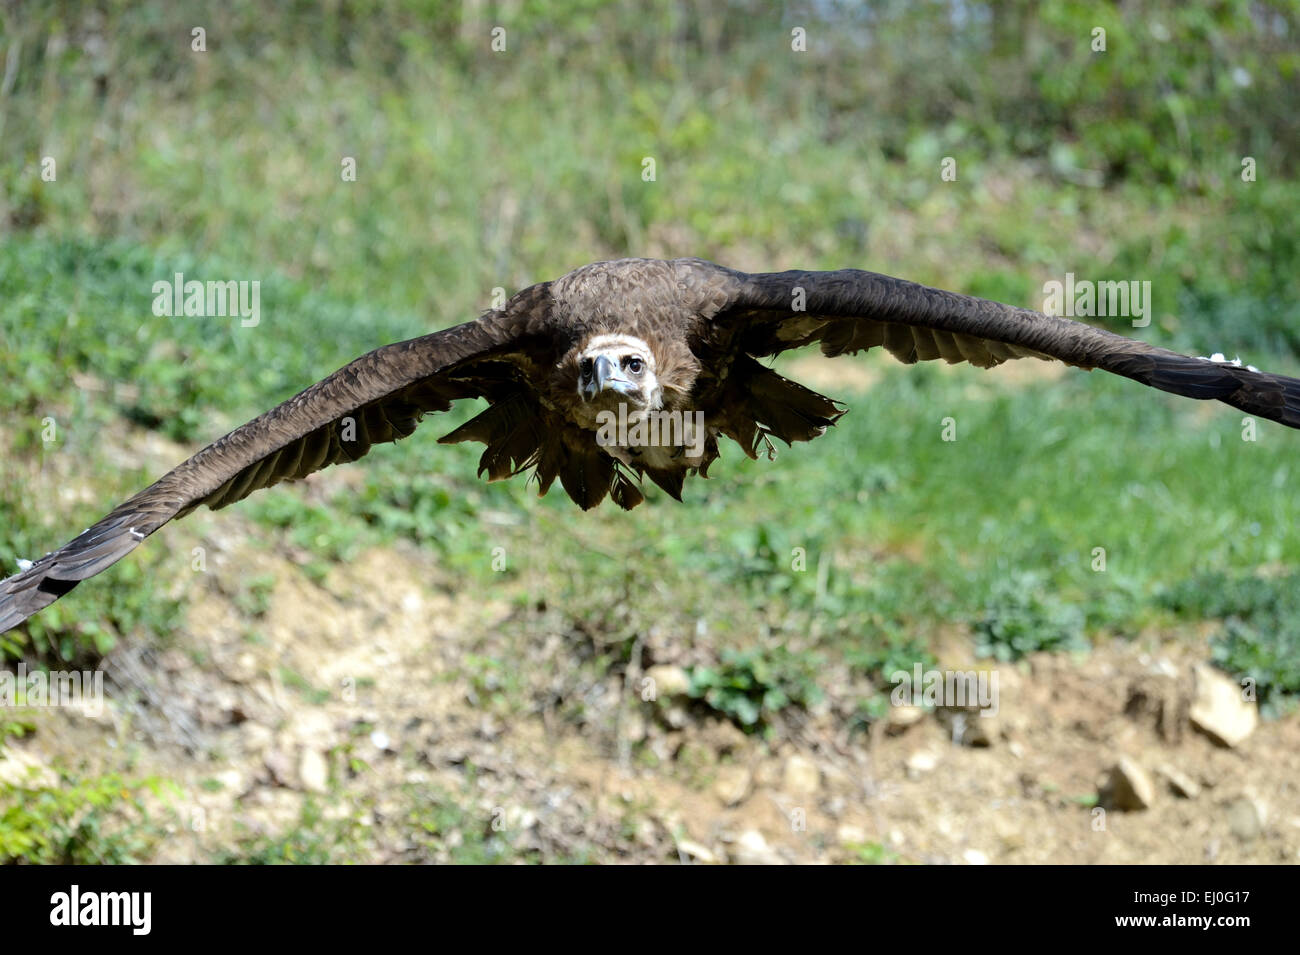 cinereous vulture, Aegypius monachus, birds, accipitrids, old world vultures, vultures, scavengers, animals, Germany, Europe, Stock Photo